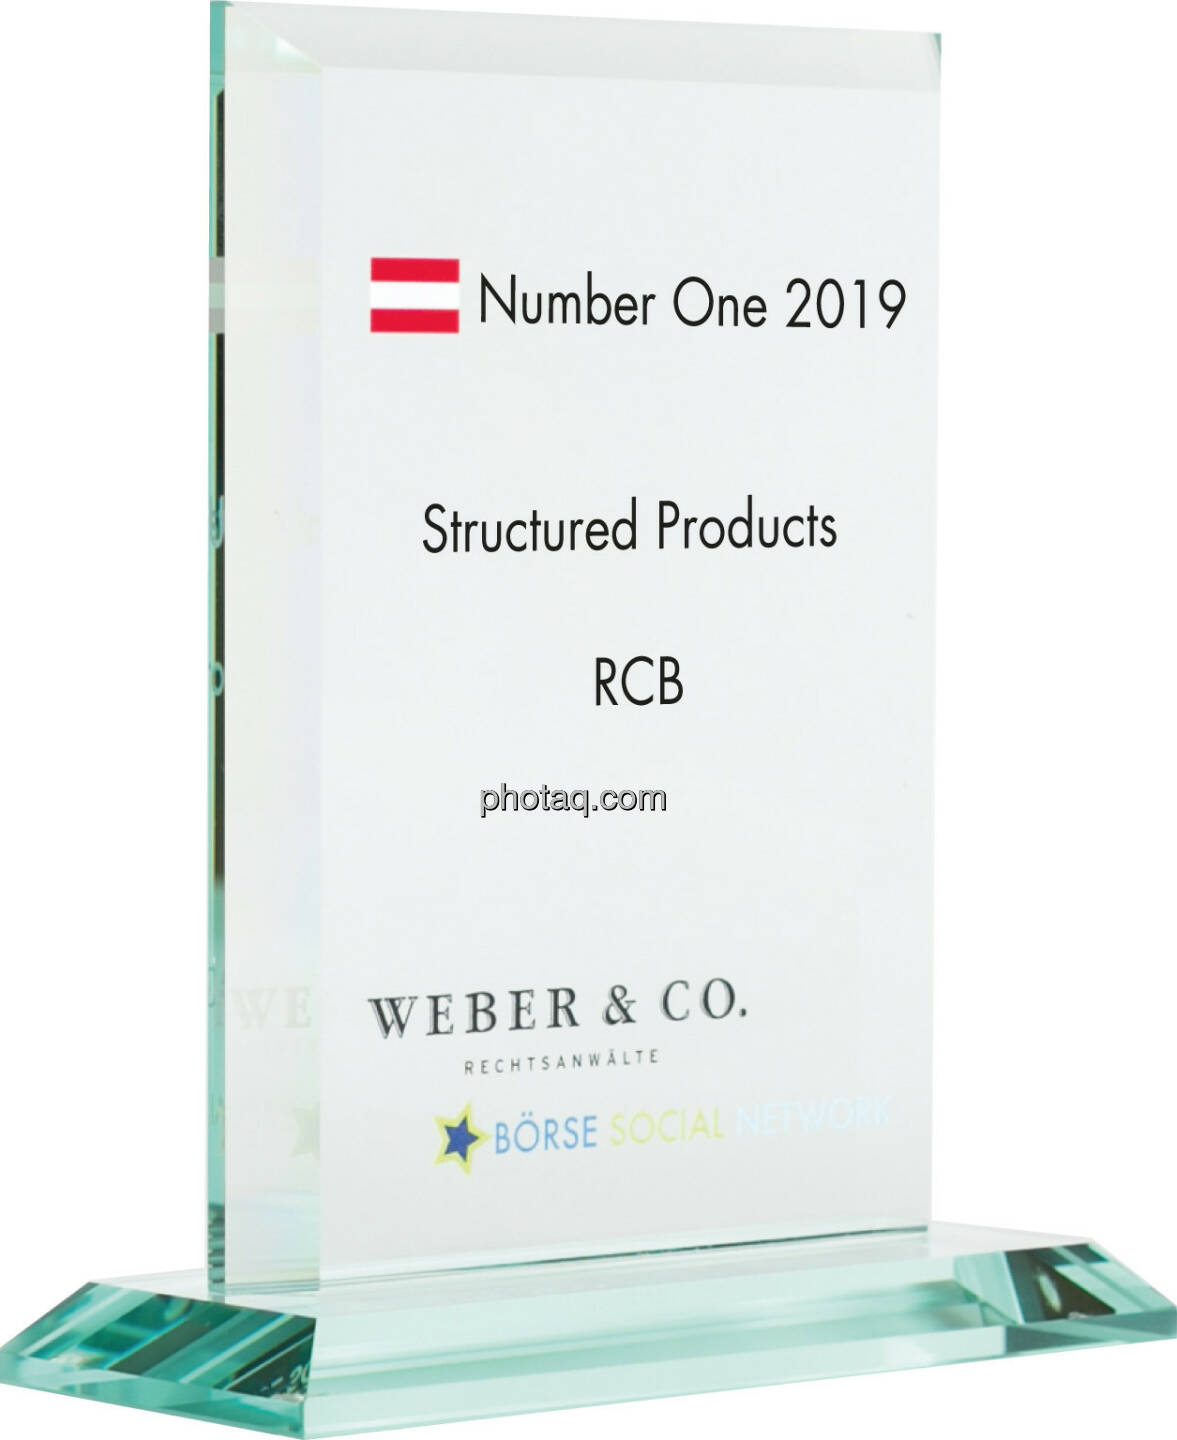 Number One Awards 2019 - Structured Products RCB